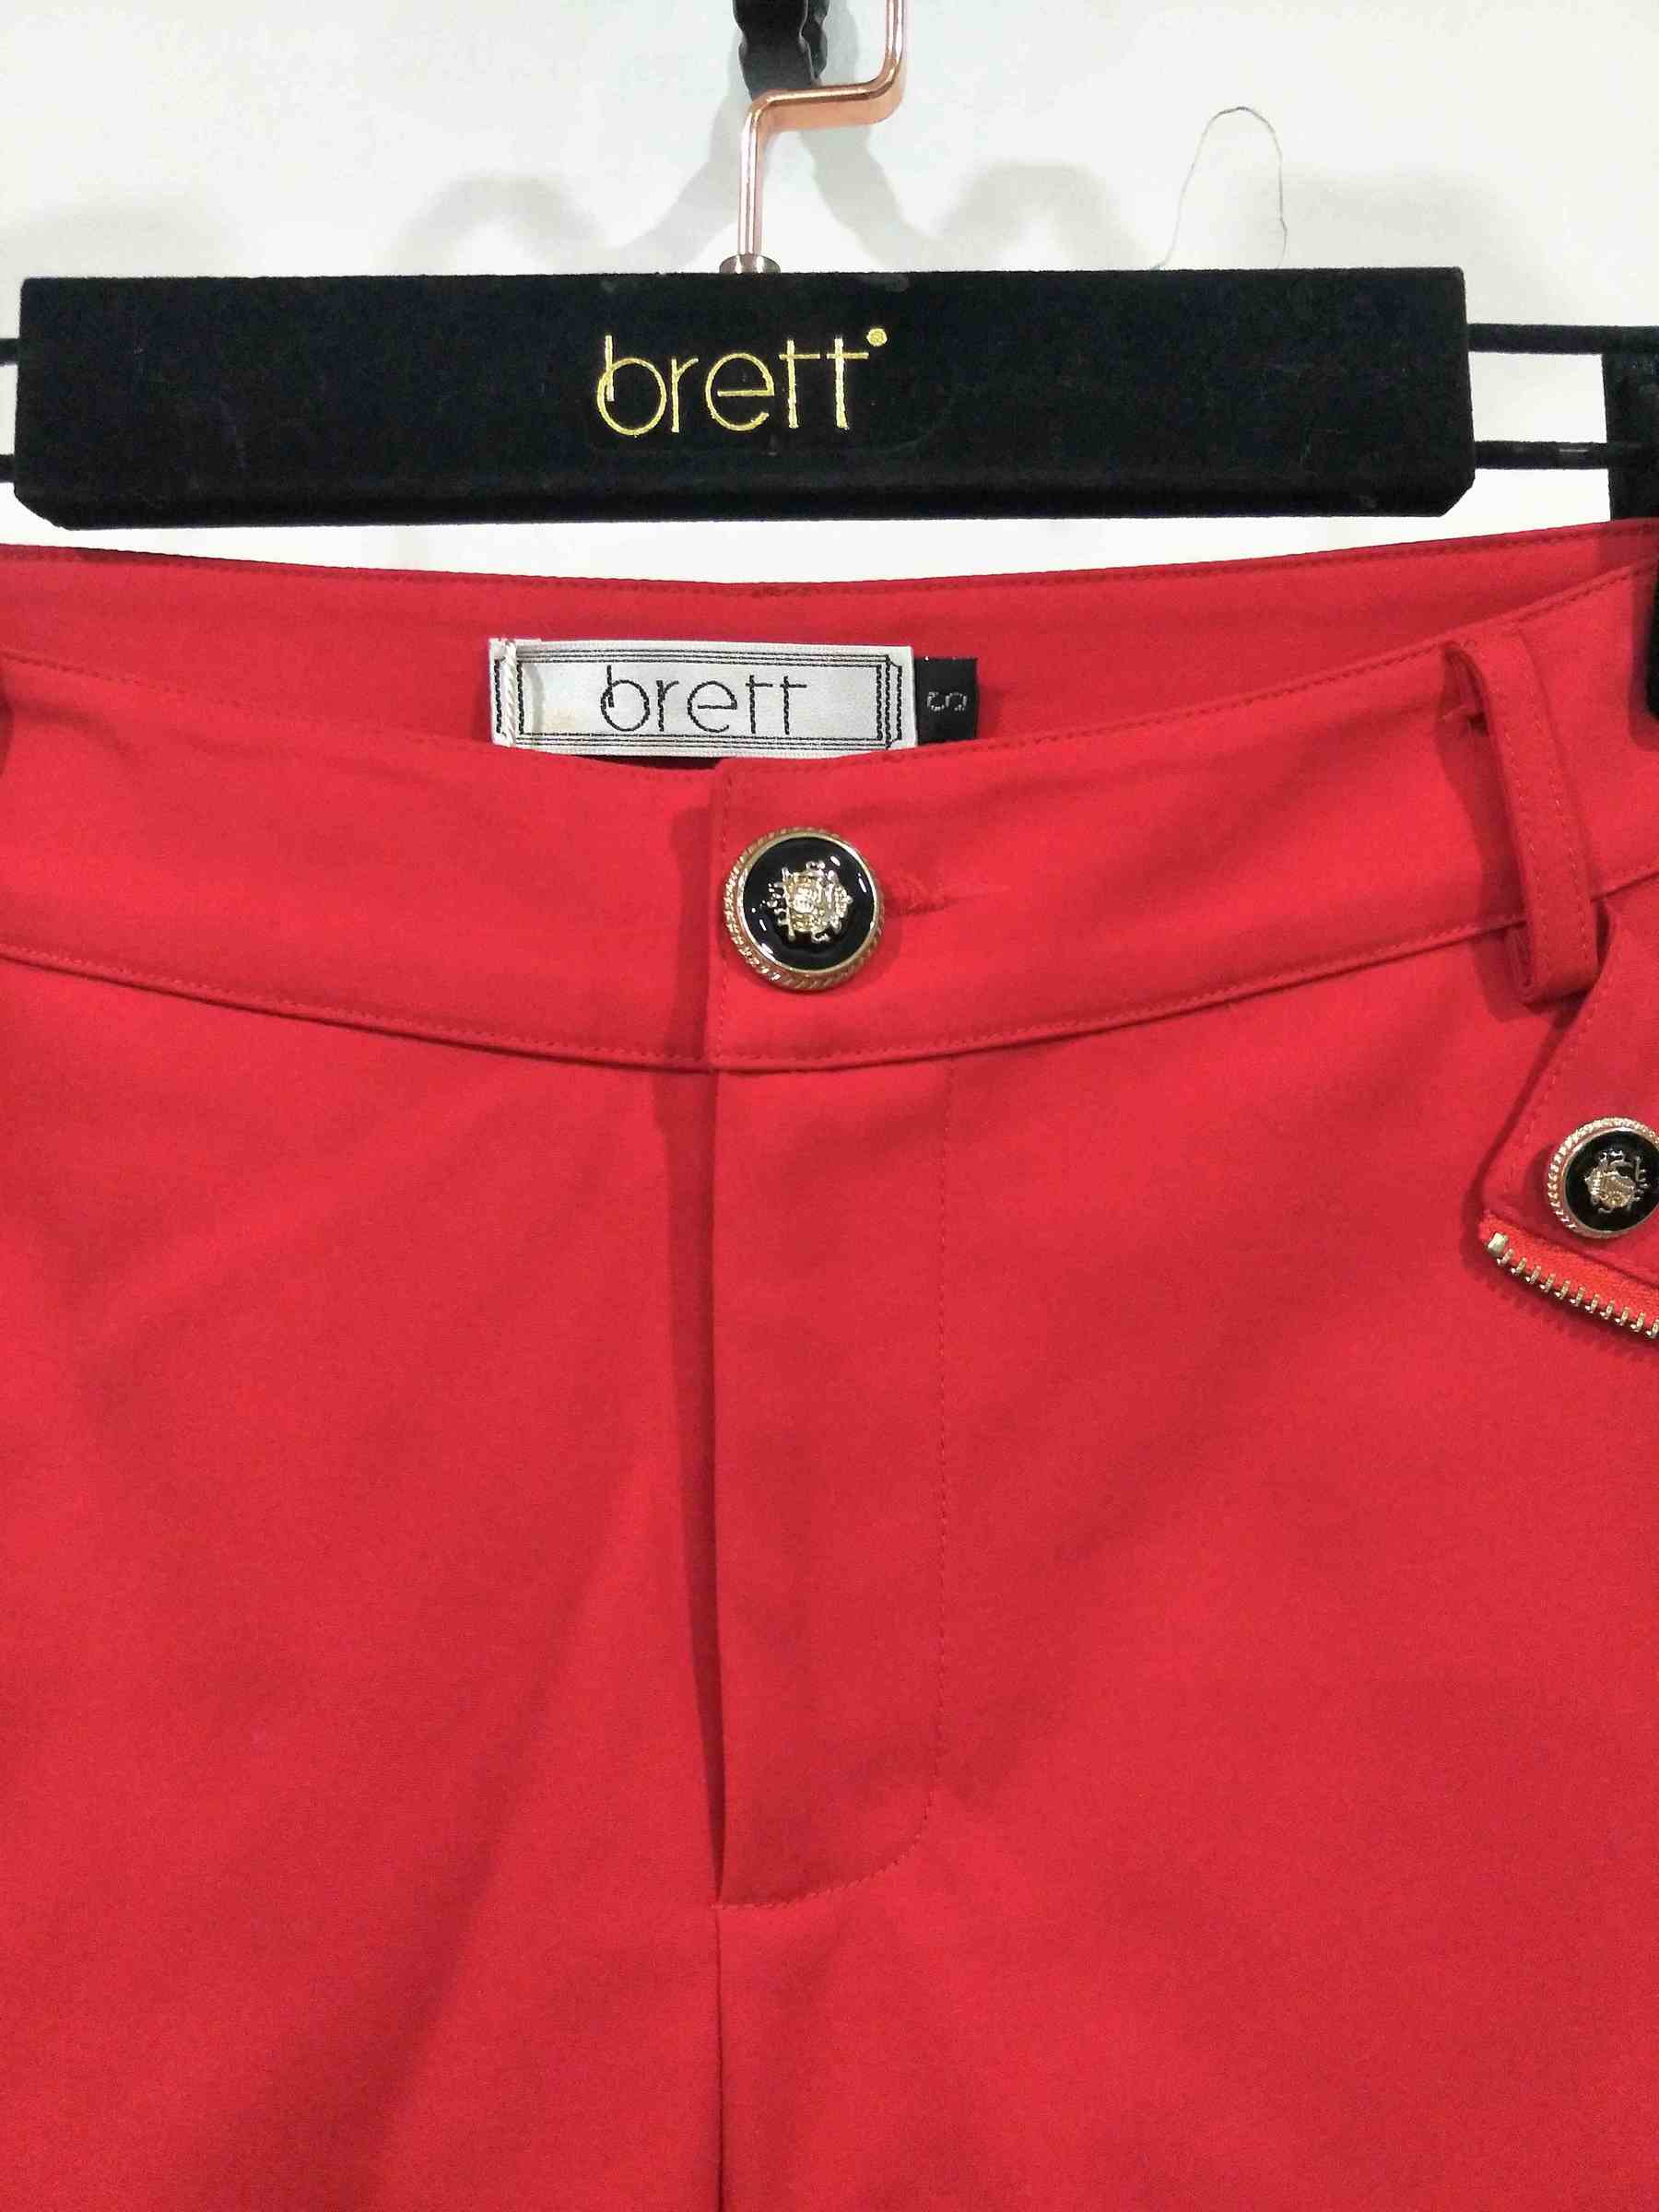 Latest red shorts designer fashion with casual shorts style button on pocket for cheap shorts odm oem service (7).jpg